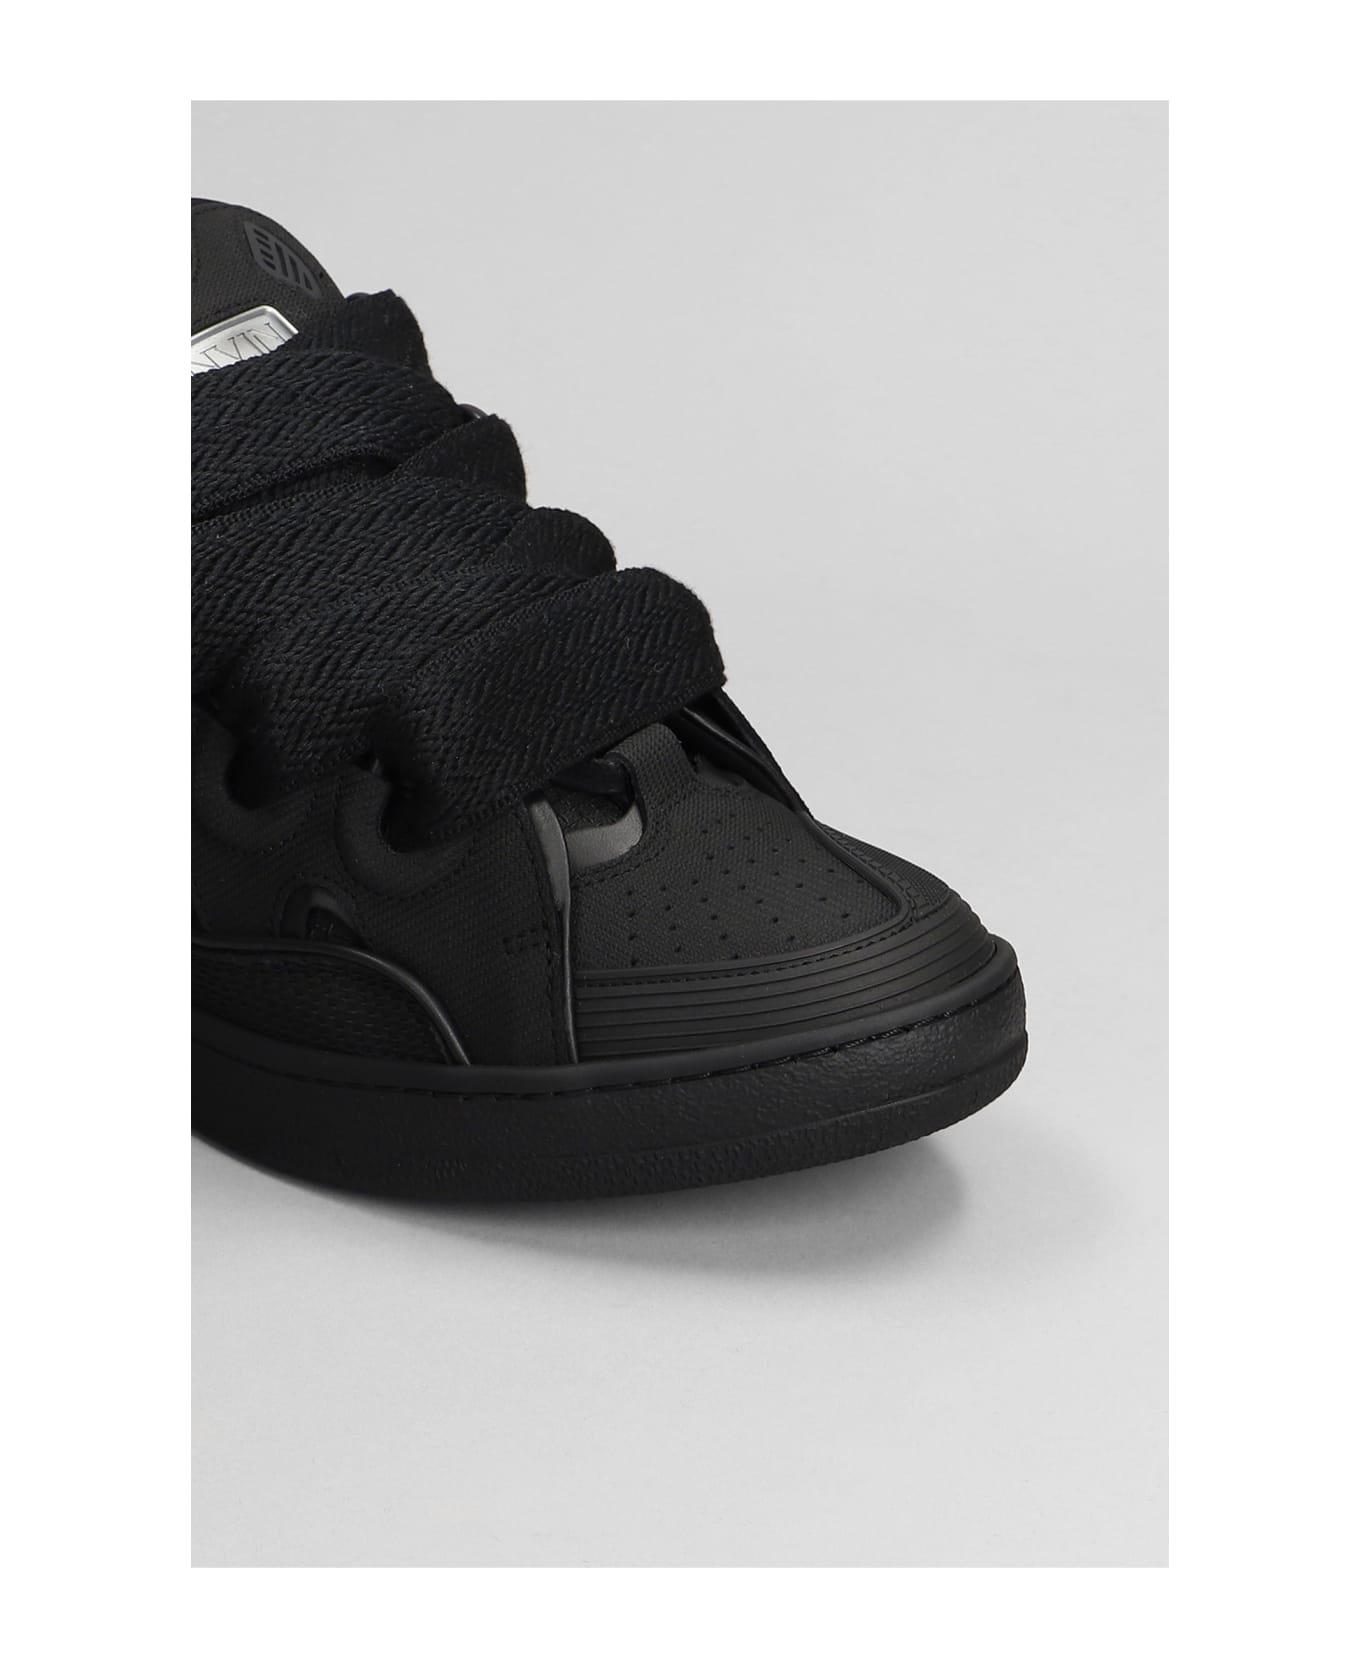 Lanvin Curb Sneakers In Black Leather - black